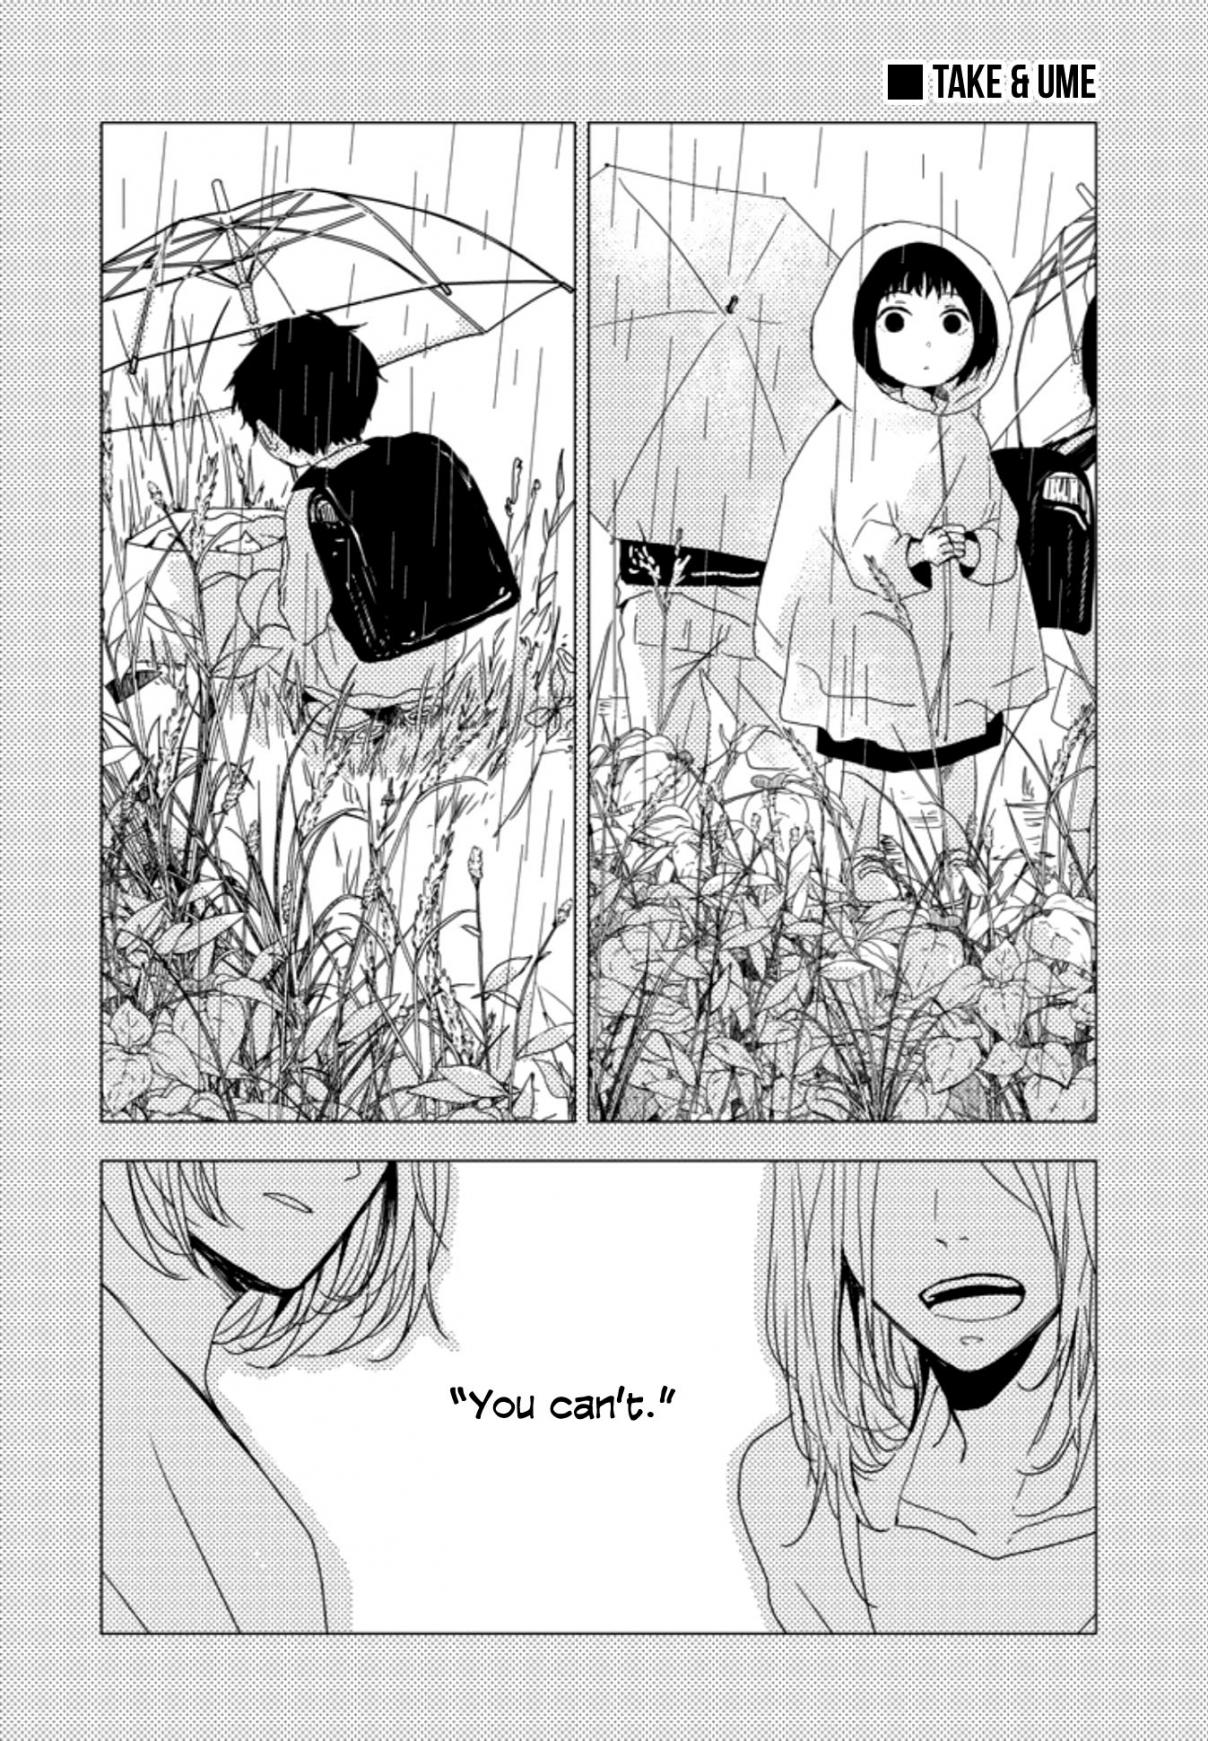 10th You and I fell in love with the same person. Vol. 1 Ch. 2 He'll Probably Be Taken From Me